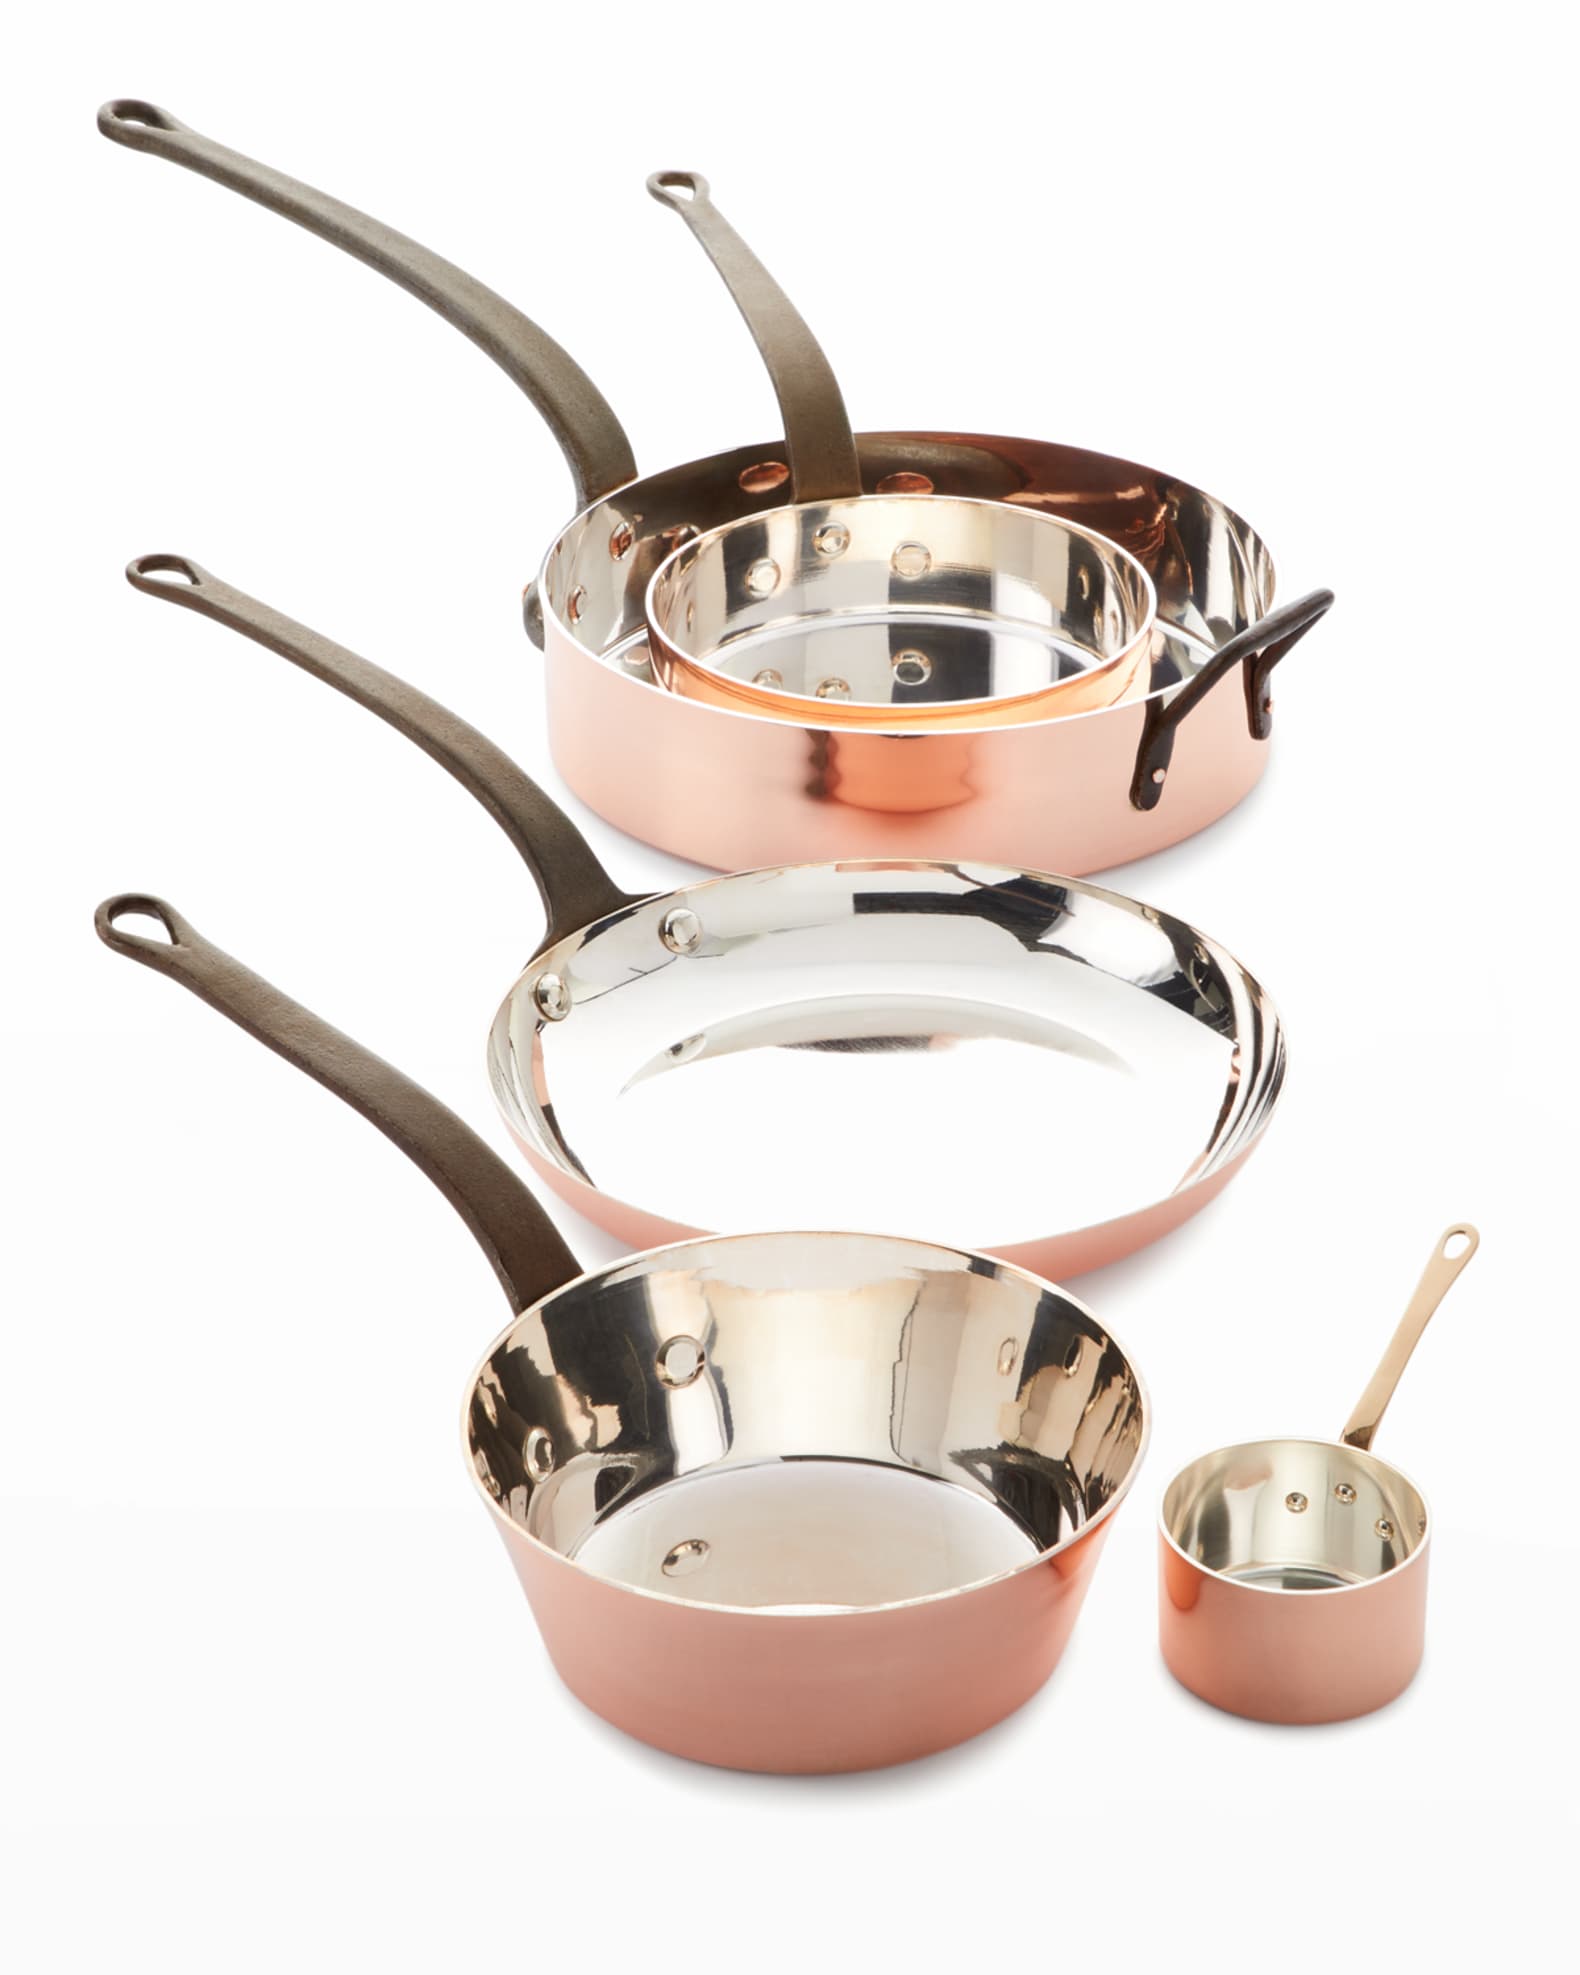 The pots/pans (like the  solid better)